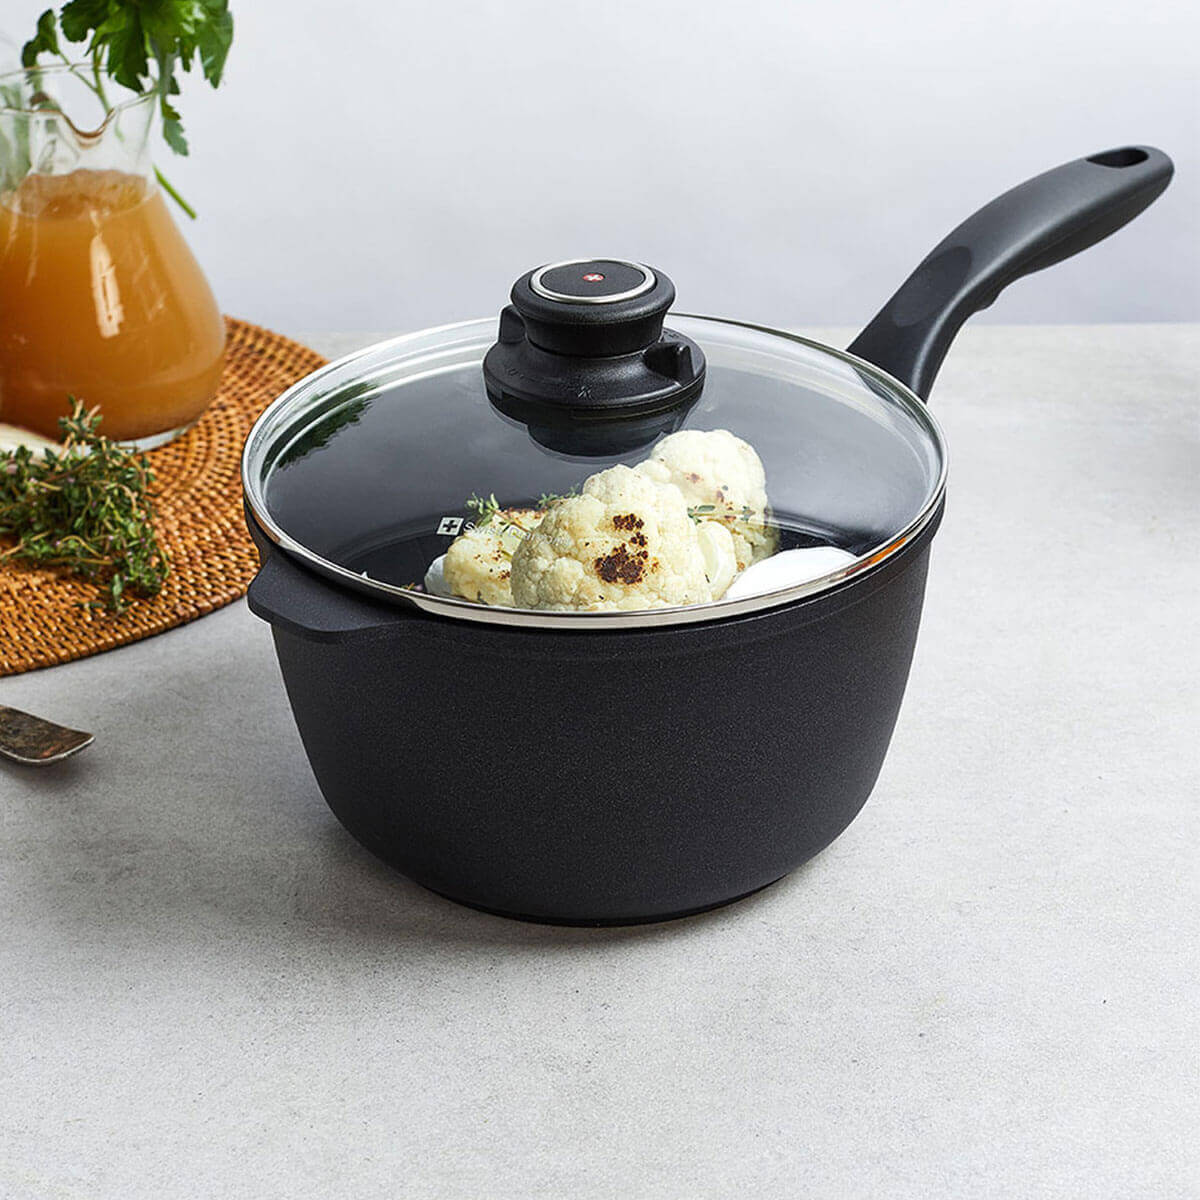 xd saucepan with lid in use with cooked cauliflower on kitchen counter